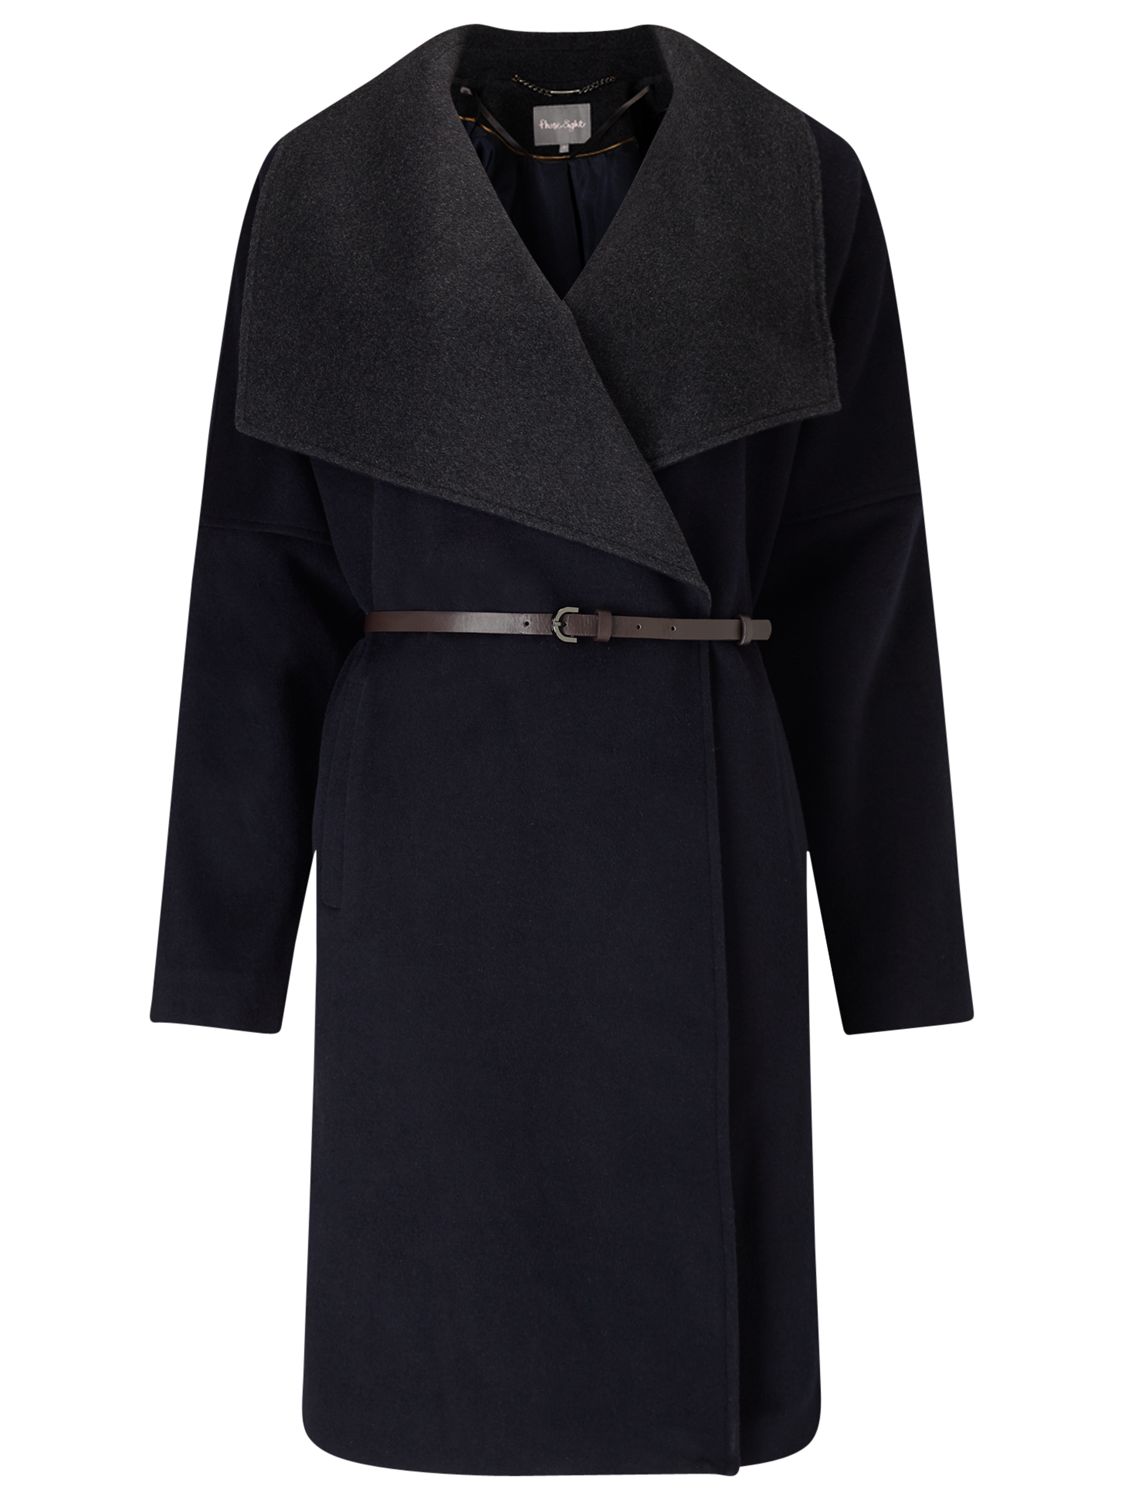 Phase Eight Bruna Belted Coat, Navy/Charcoal